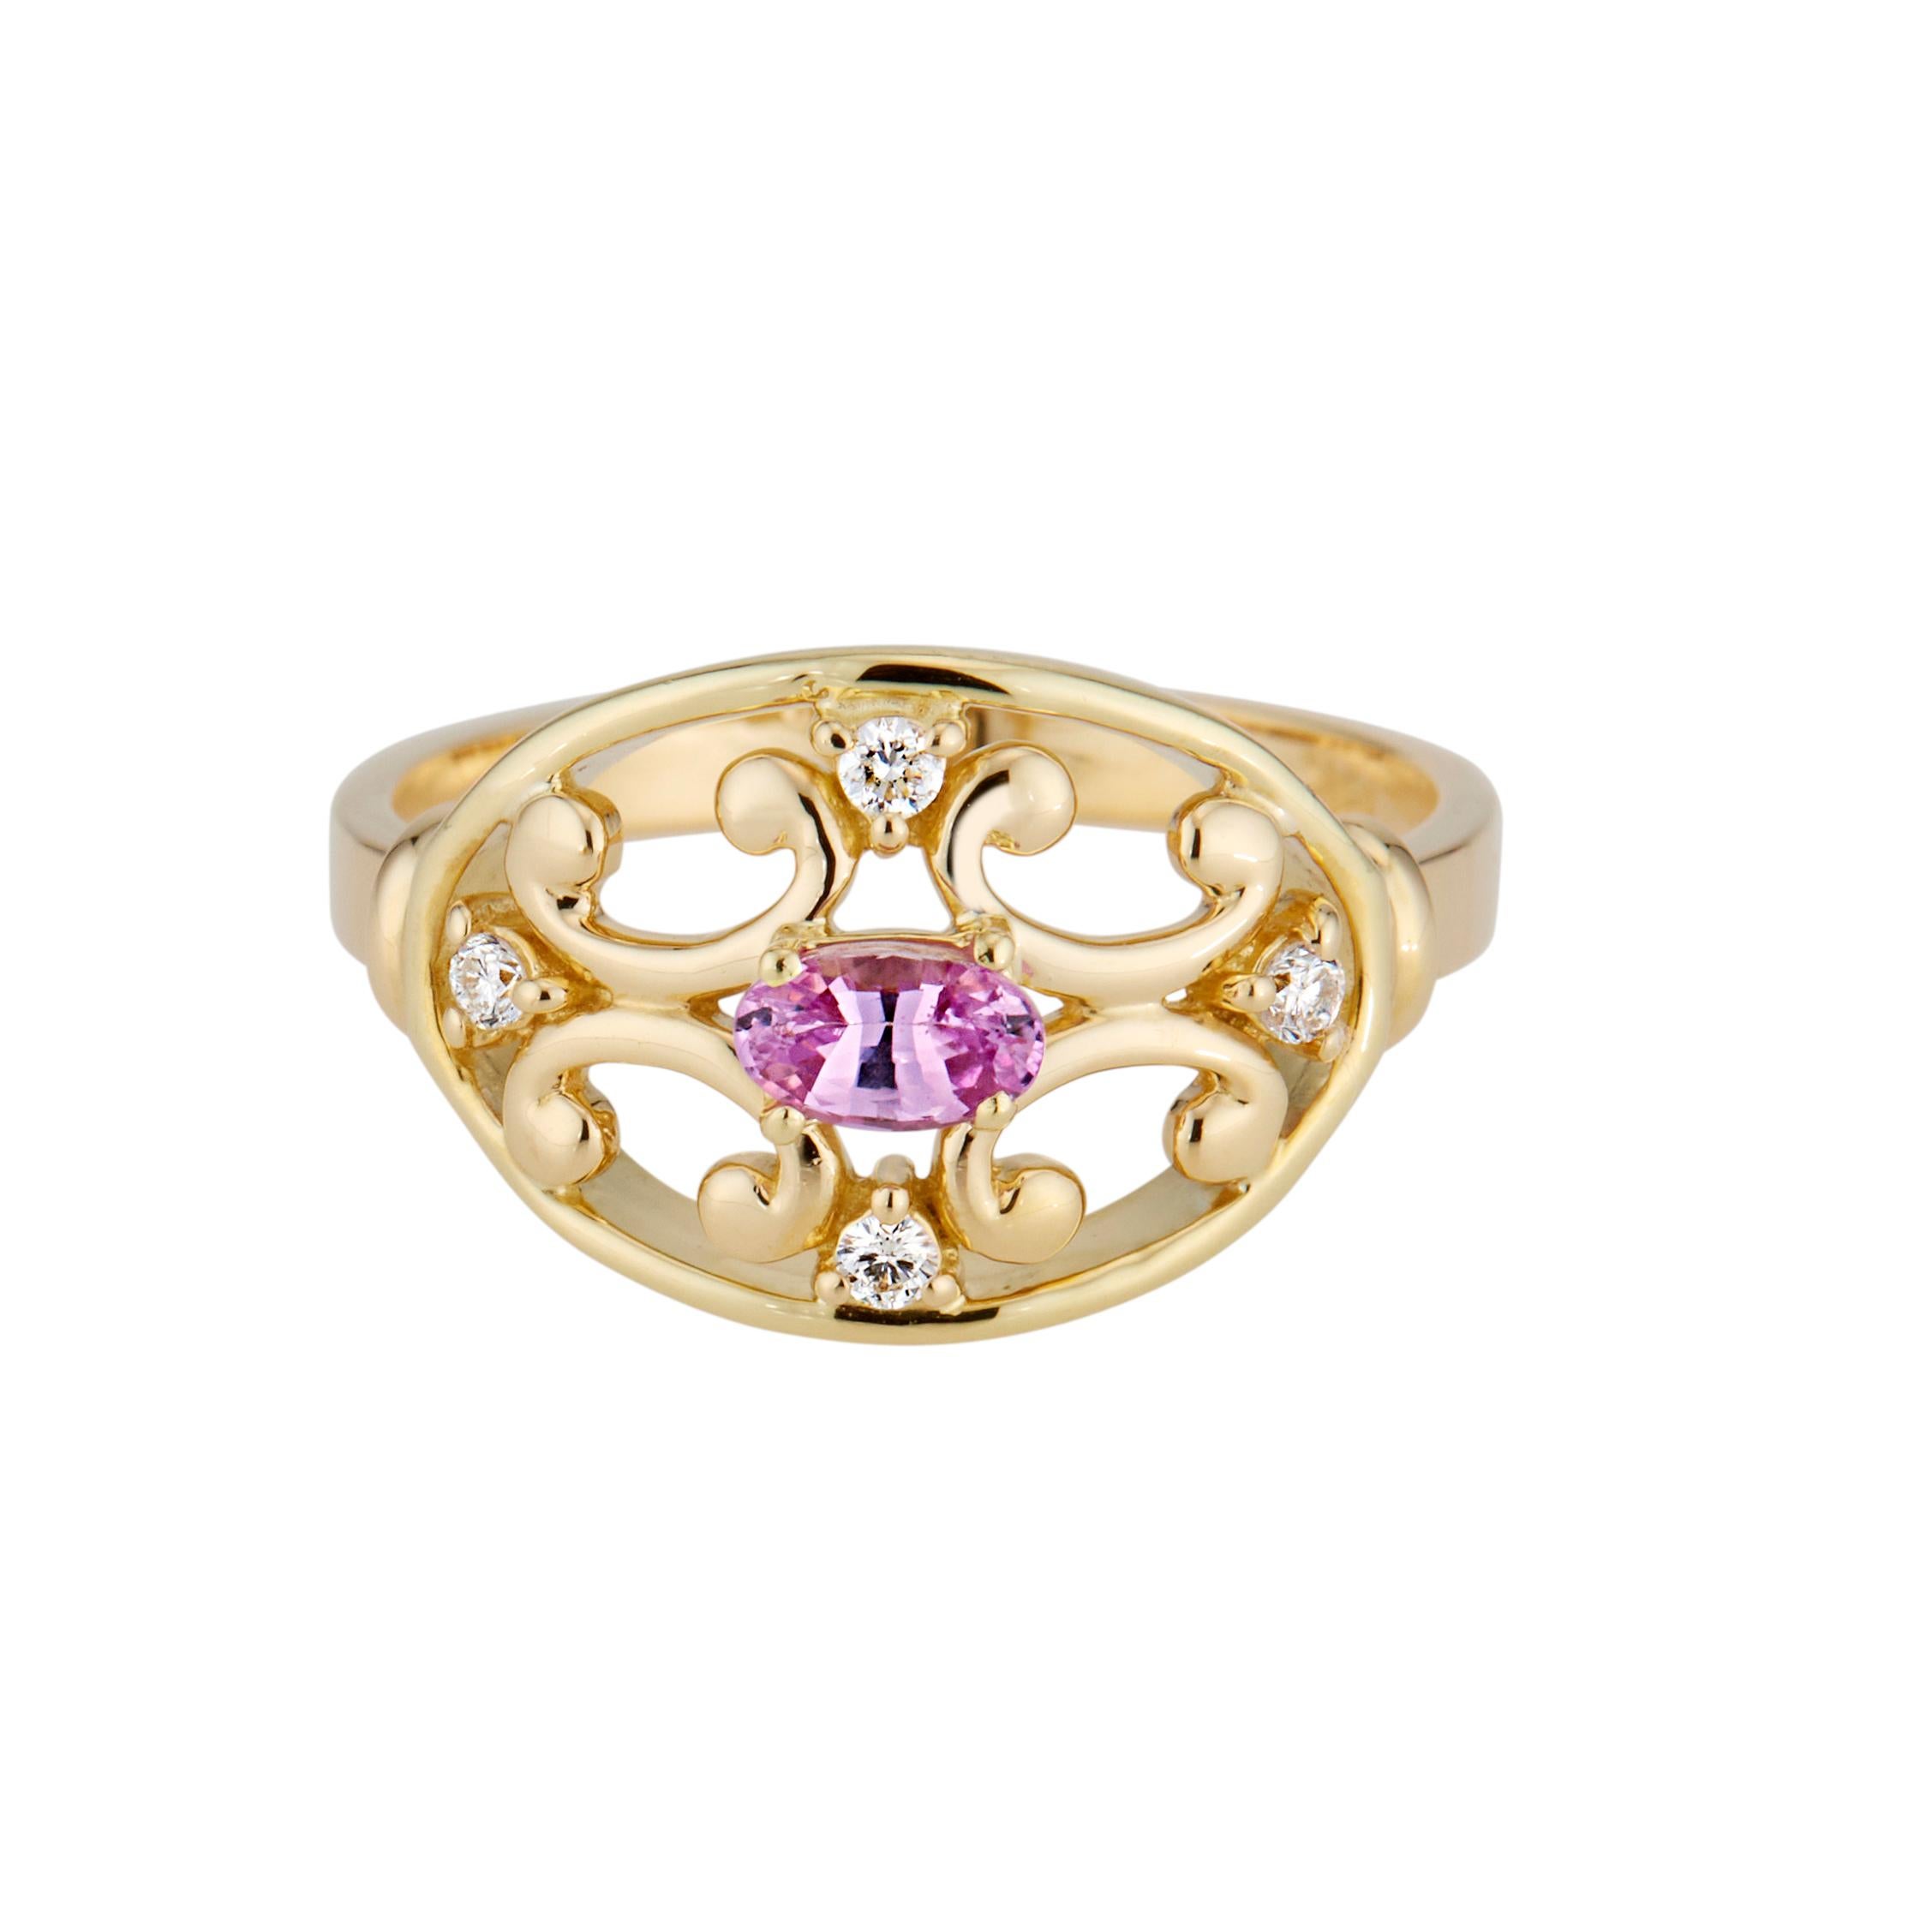 Sapphire and diamond open work ring. Pink Oval sapphire in an open work 18k yellow gold Etruscan style setting with 4 round brilliant cut accent diamonds. 

1 oval pink sapphire, VS approx. .25cts
4 round brilliant cut diamonds, G SI approx.